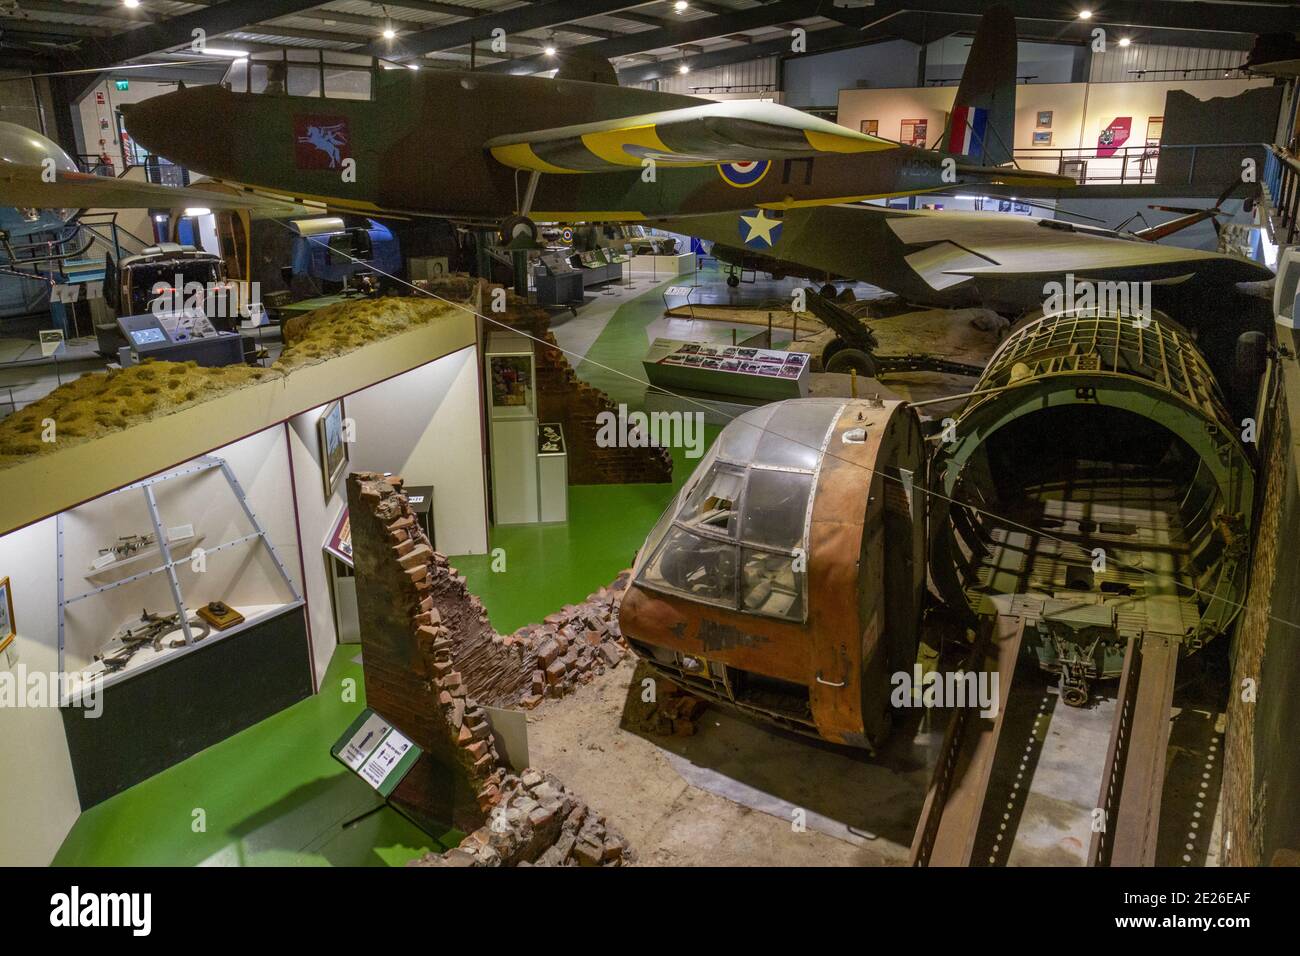 Glider plane displays at the Army Flying Museum, a Military Aviation Museum in Stockbridge, Hampshire, UK. Stock Photo